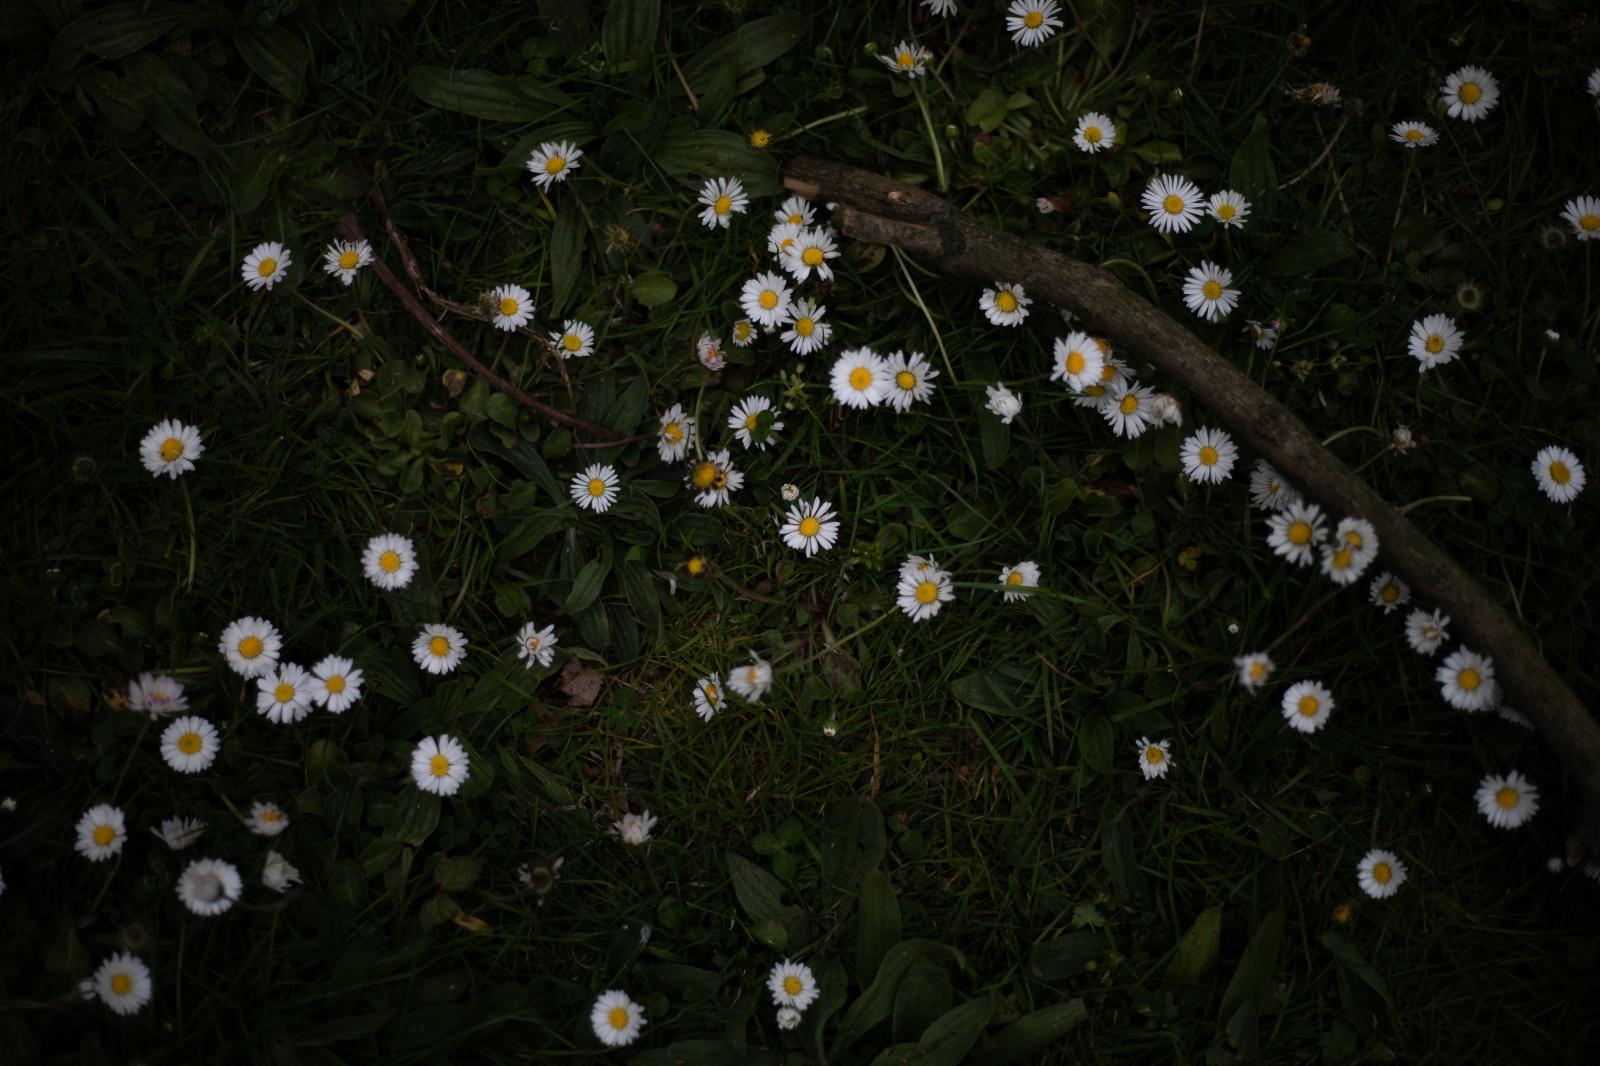 Daisies and branch